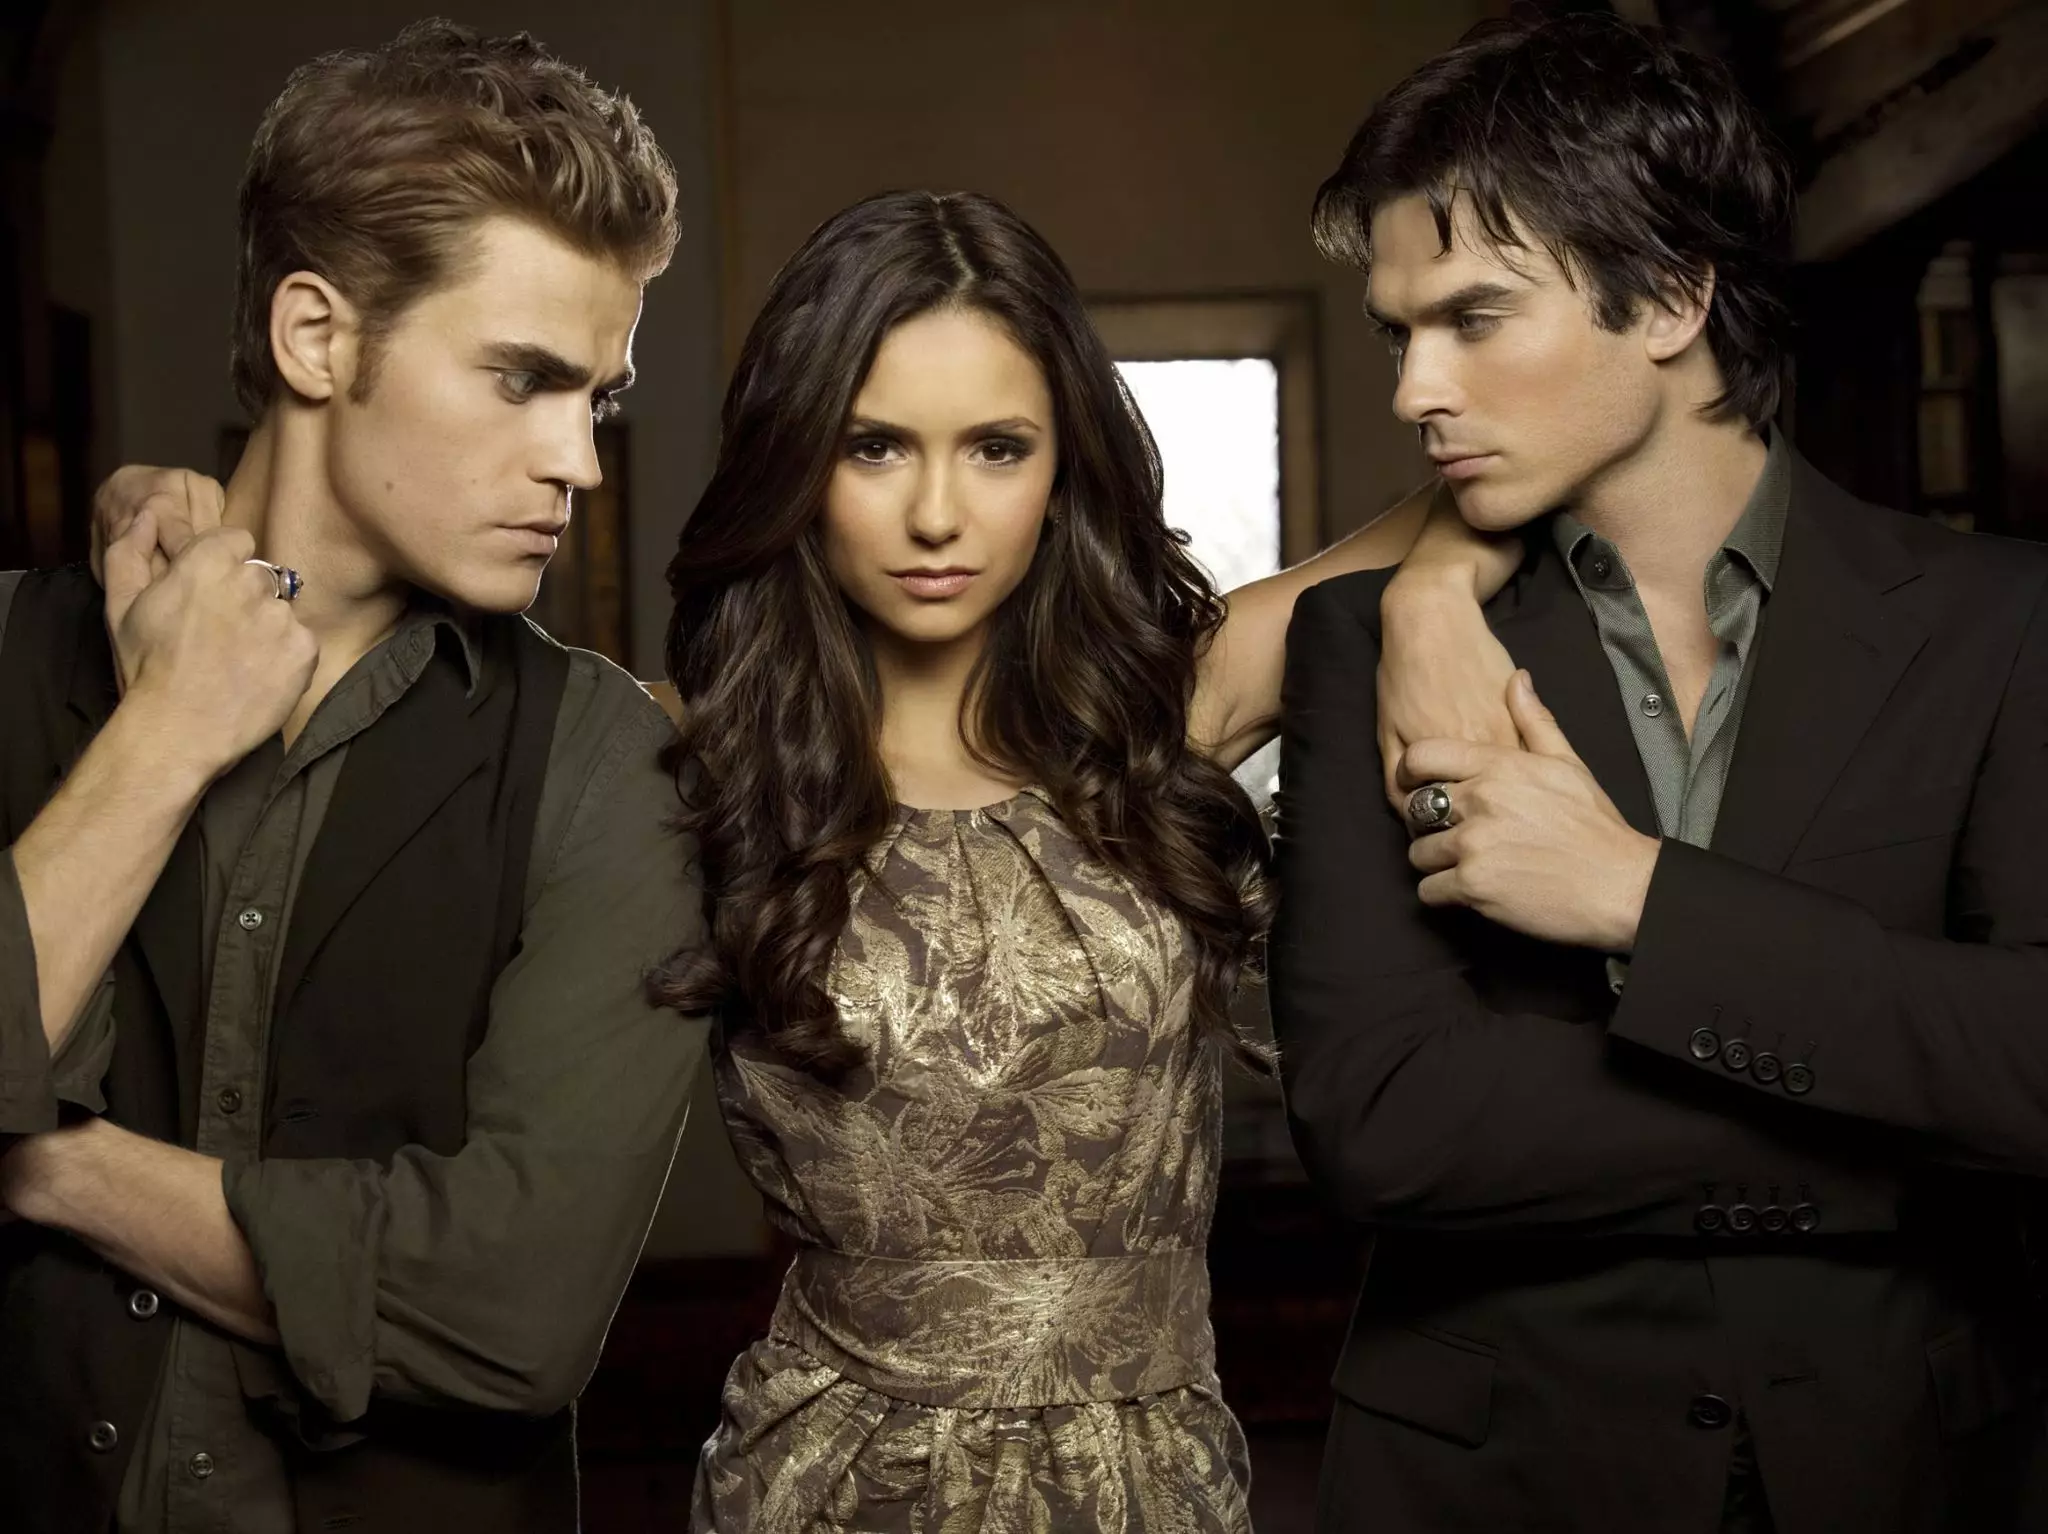 The Vampire Diaries has spawned two TV spin-offs (